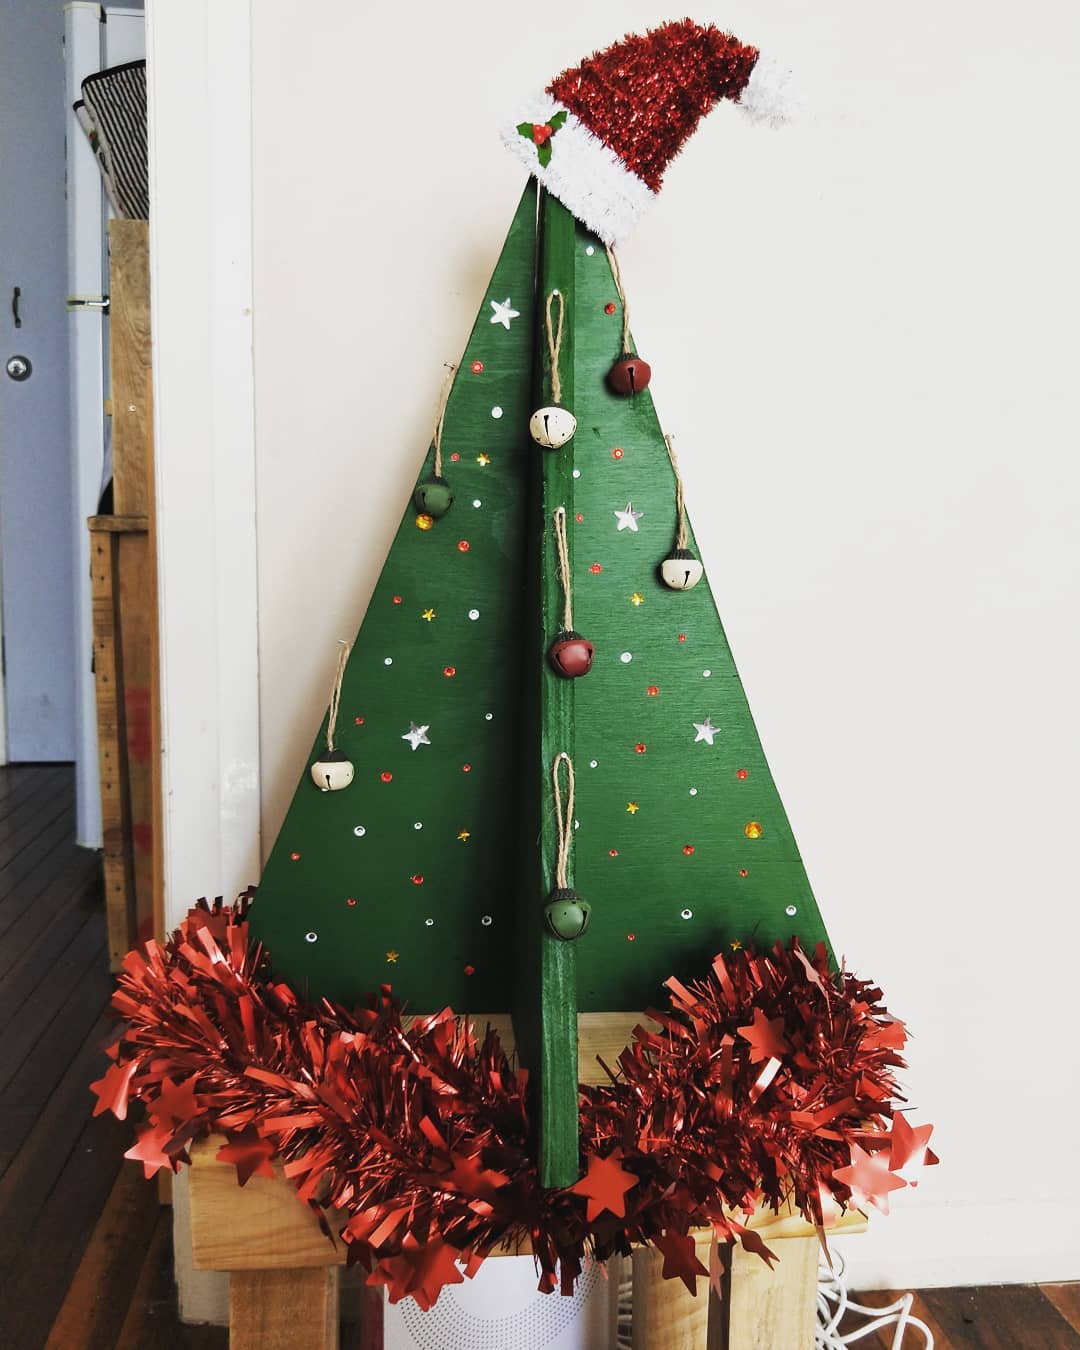 This is really really cute christmas tree!